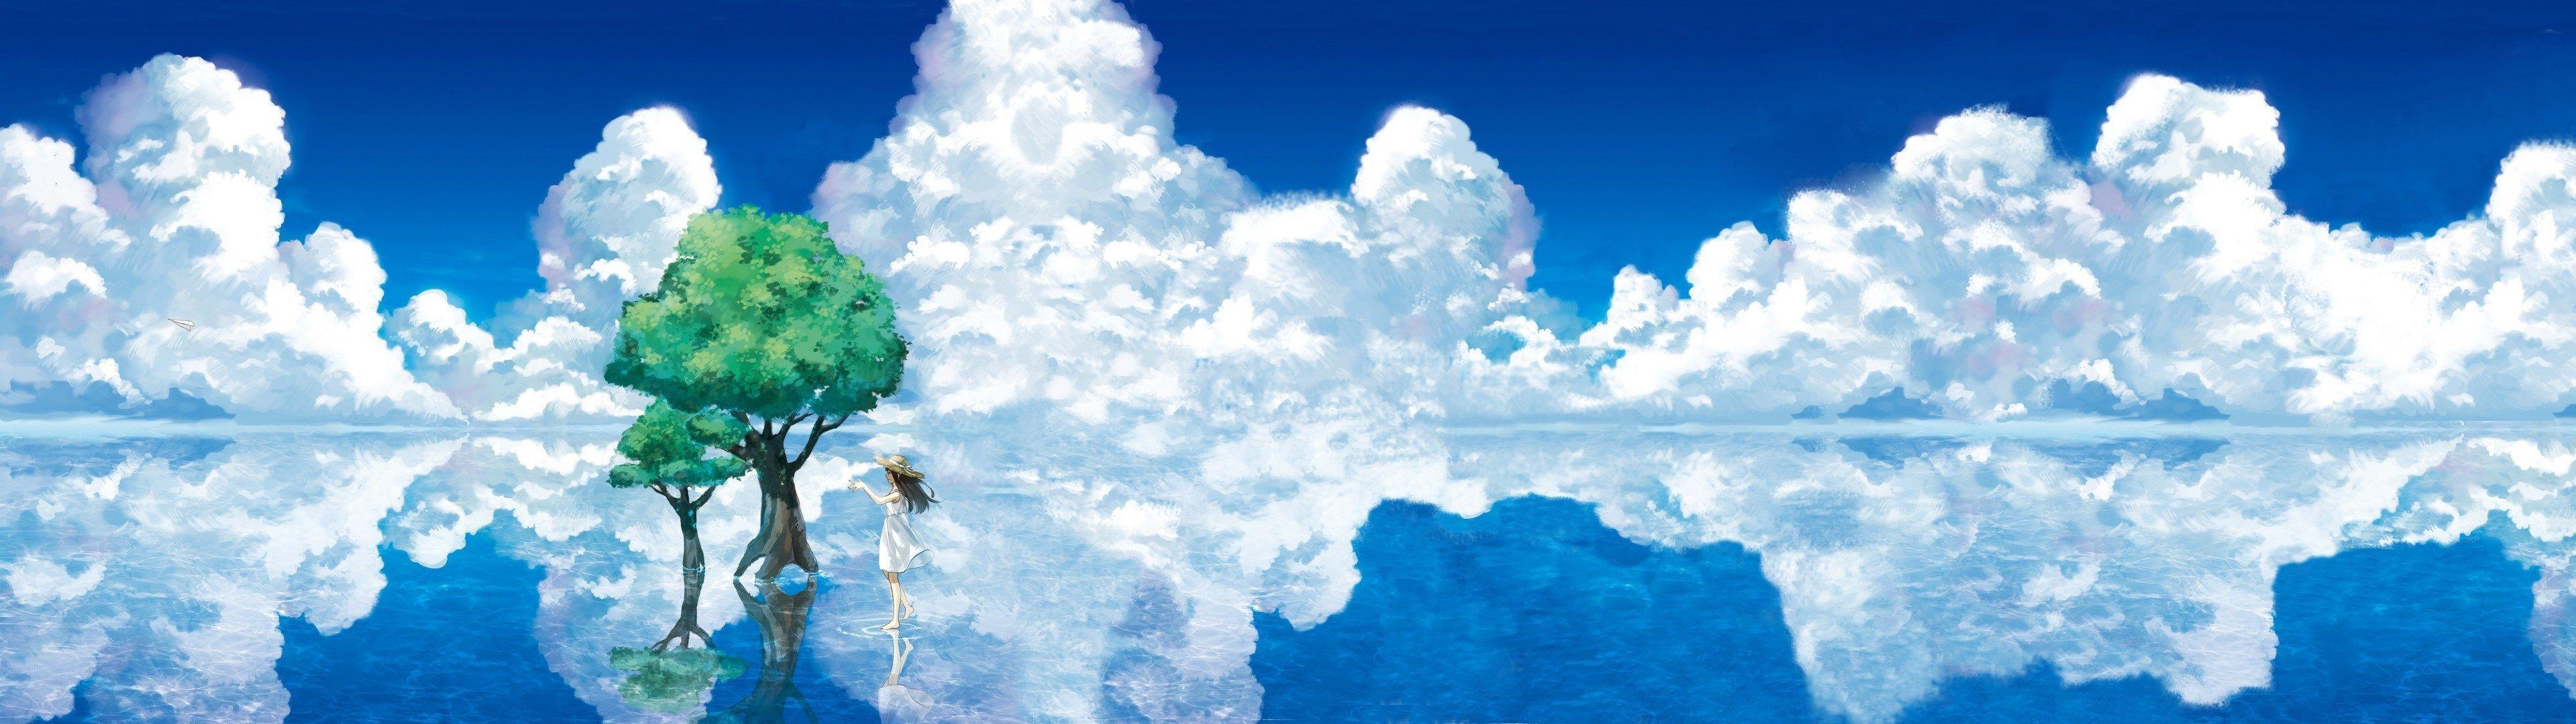 3840 X 1080 Anime Wallpapers Top Free 3840 X 1080 Anime Backgrounds Wallpaperaccess